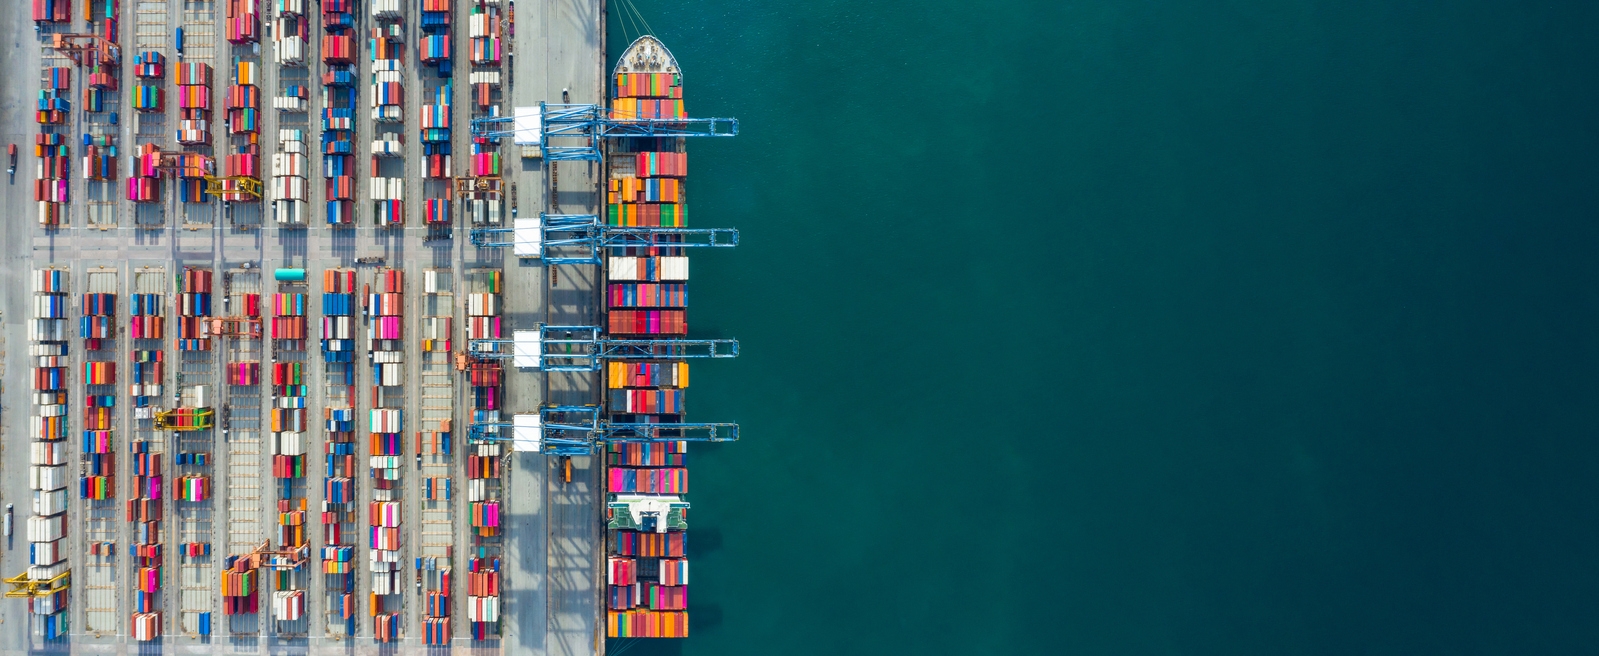 Aerial view container ship in port at container terminal port